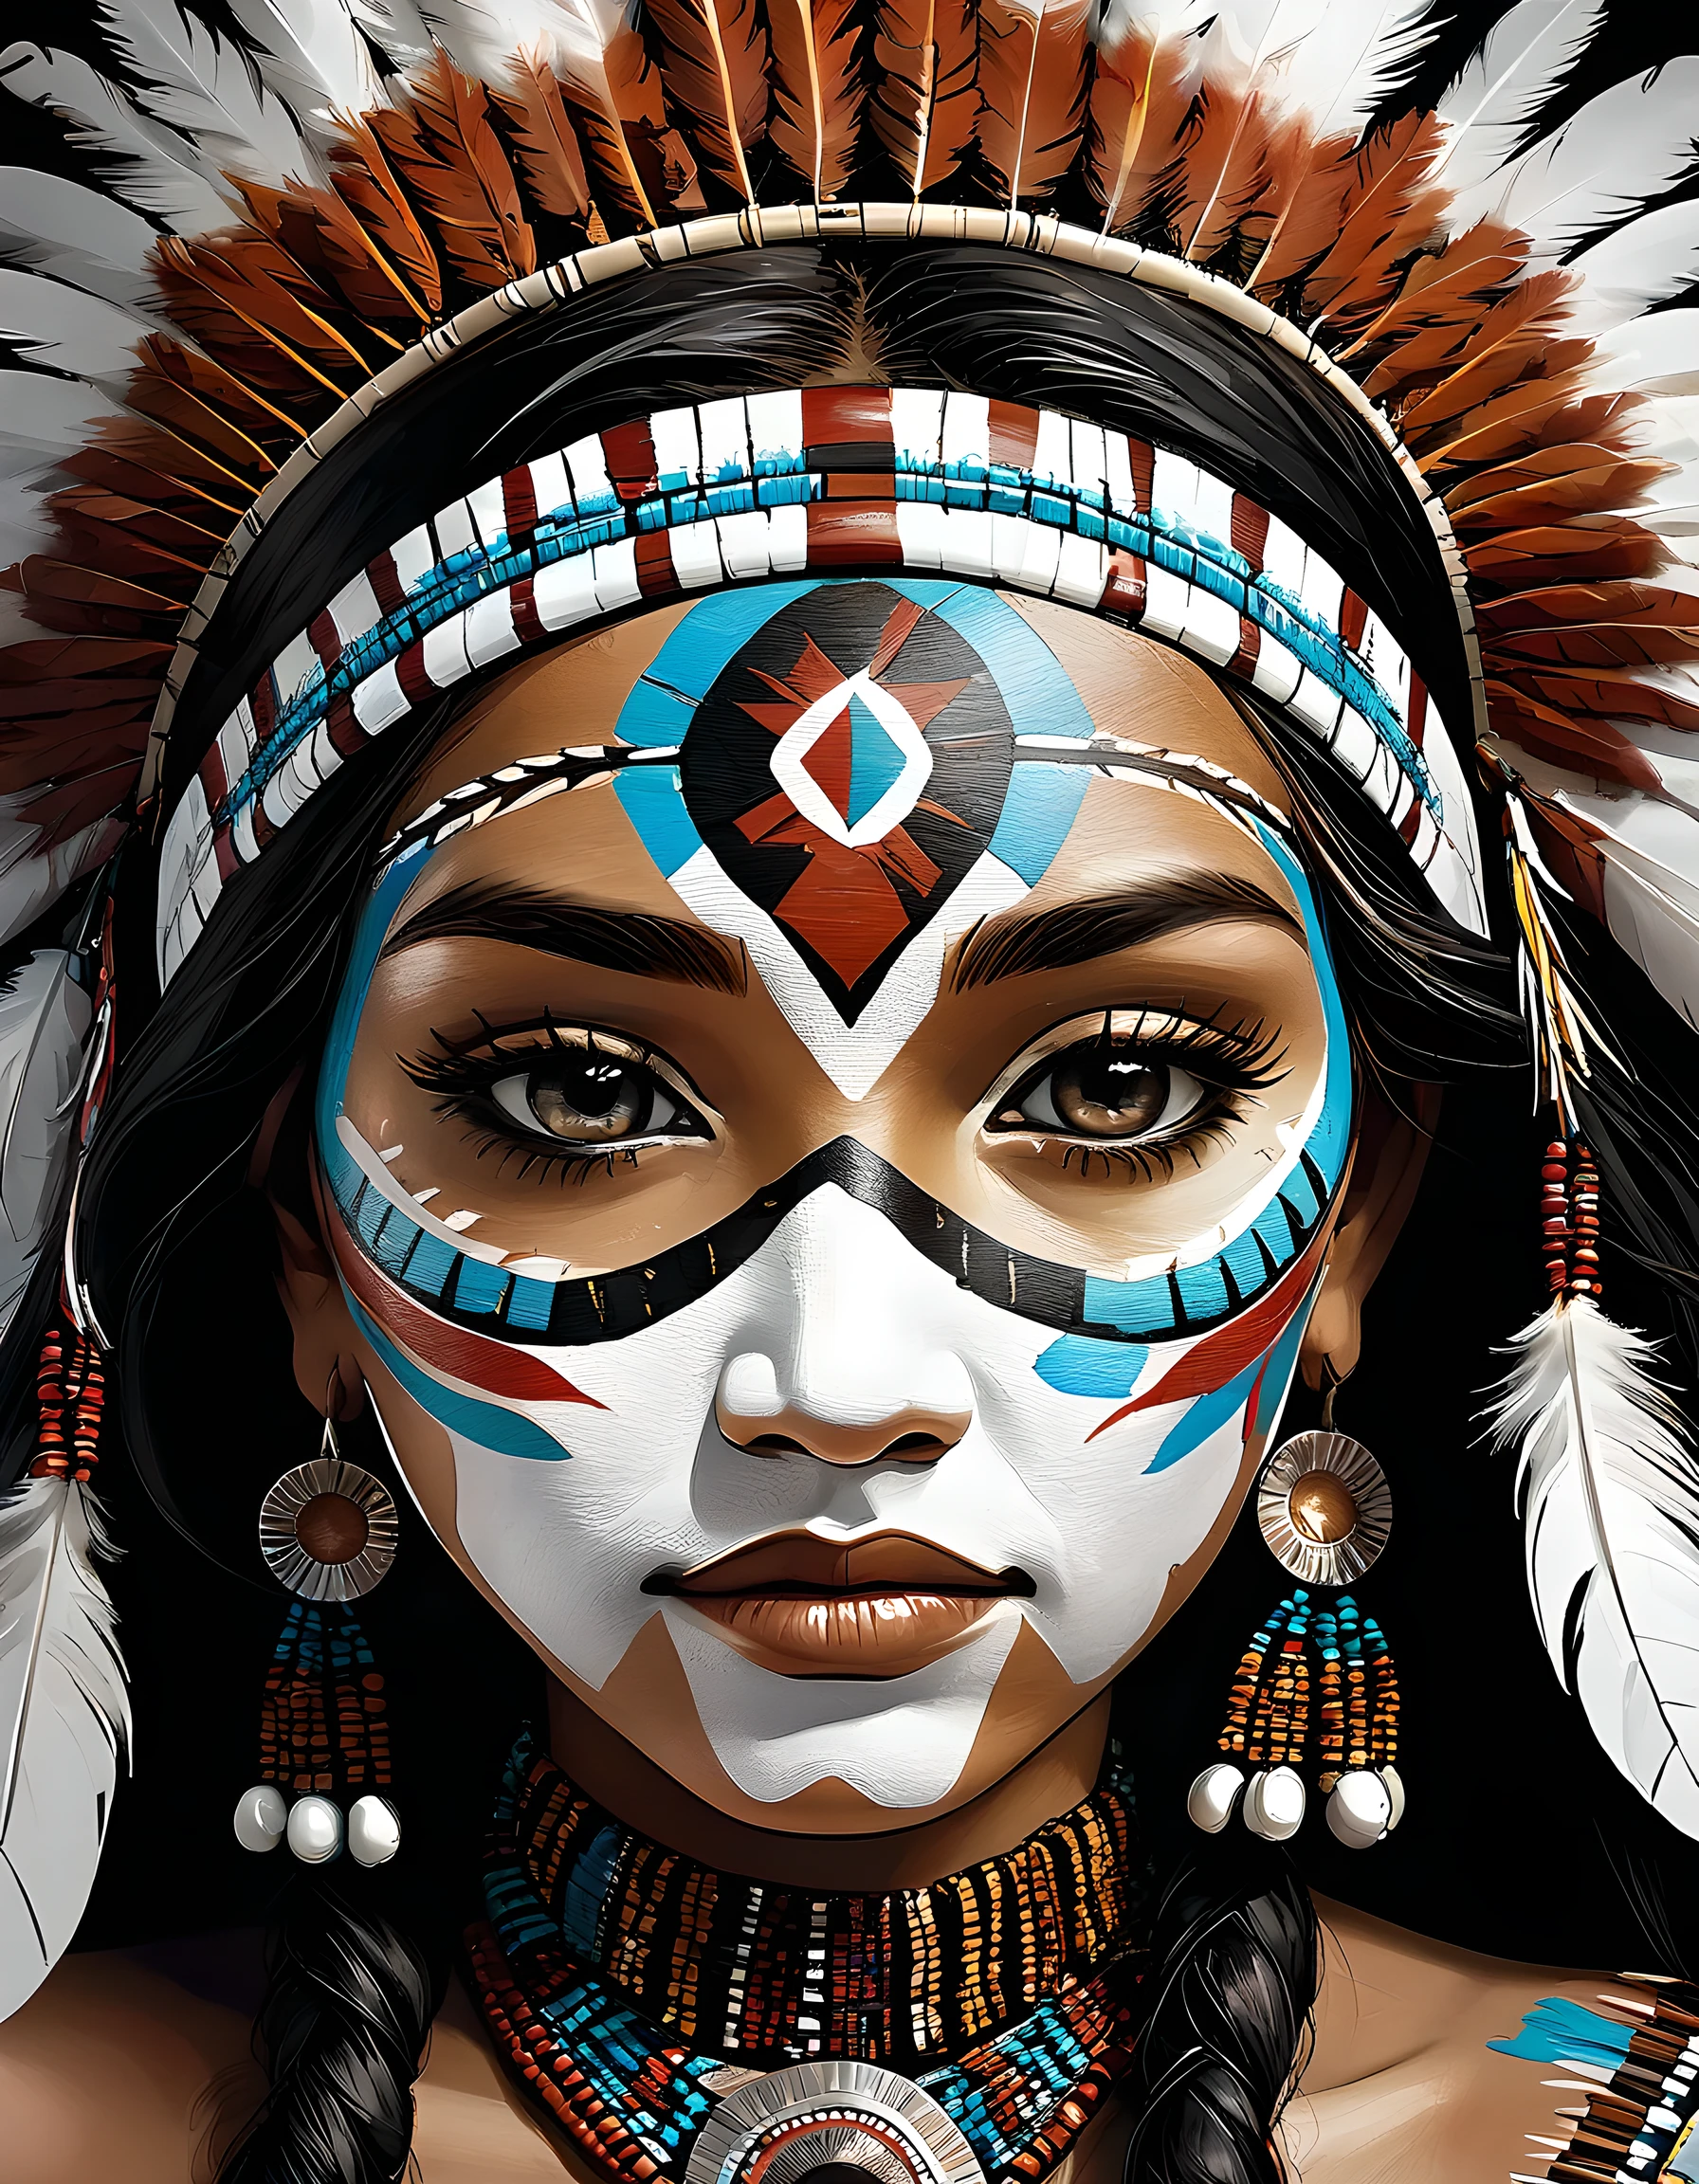 Close-Up of Face, detailed female faces., native American, first nations, Aboriginal, ornaments and accessories made of bird feathers, detailed face painting